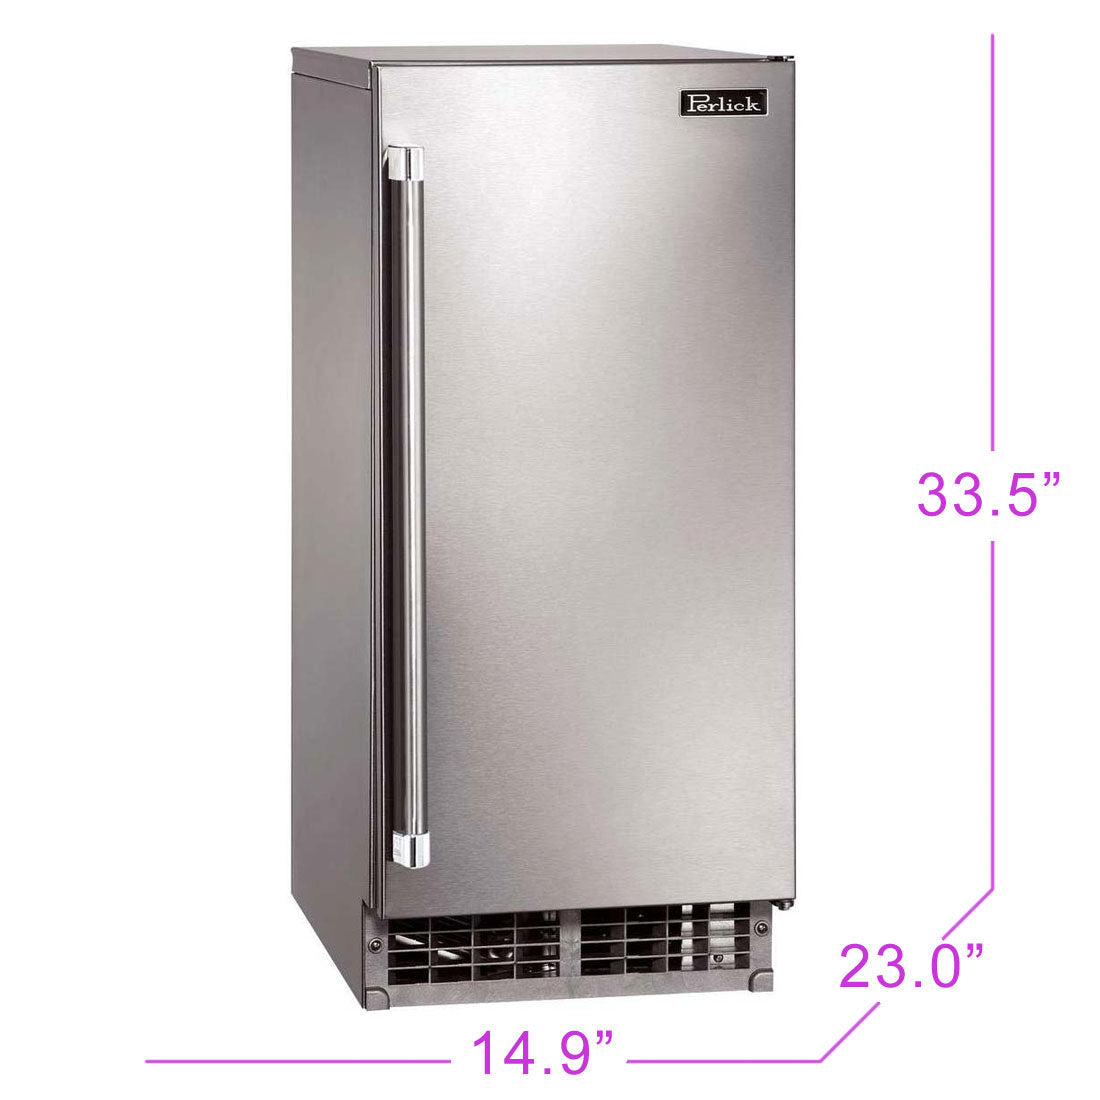 Perlick - 15" Signature Series Cubelet Ice Maker with panel-ready solid door, hinge reversible - H80CIMW